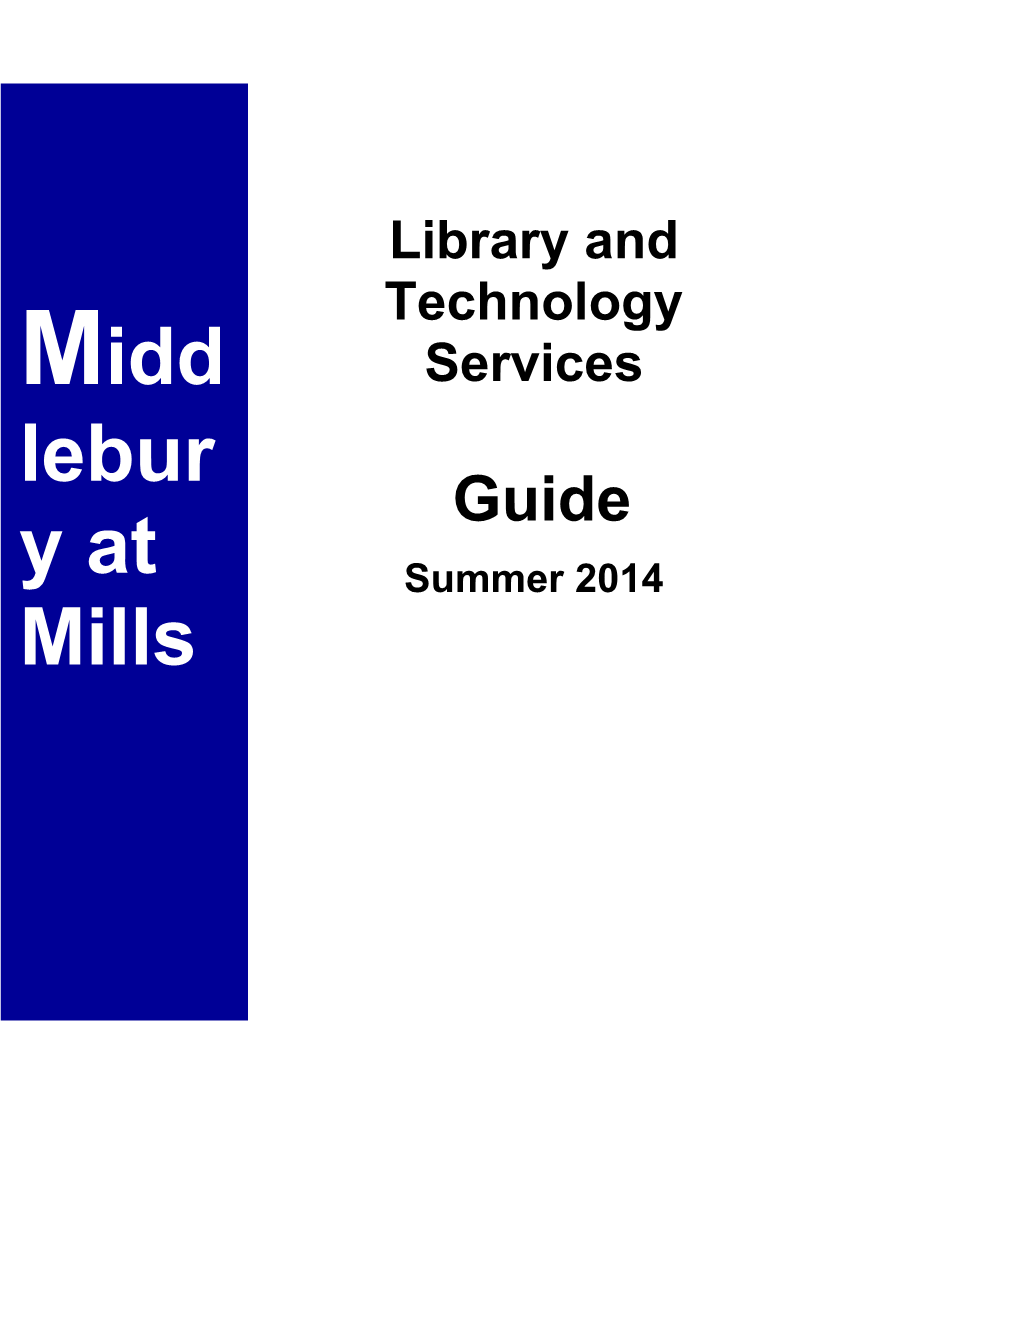 Middlebury at Mills Student Guide Summer 2014